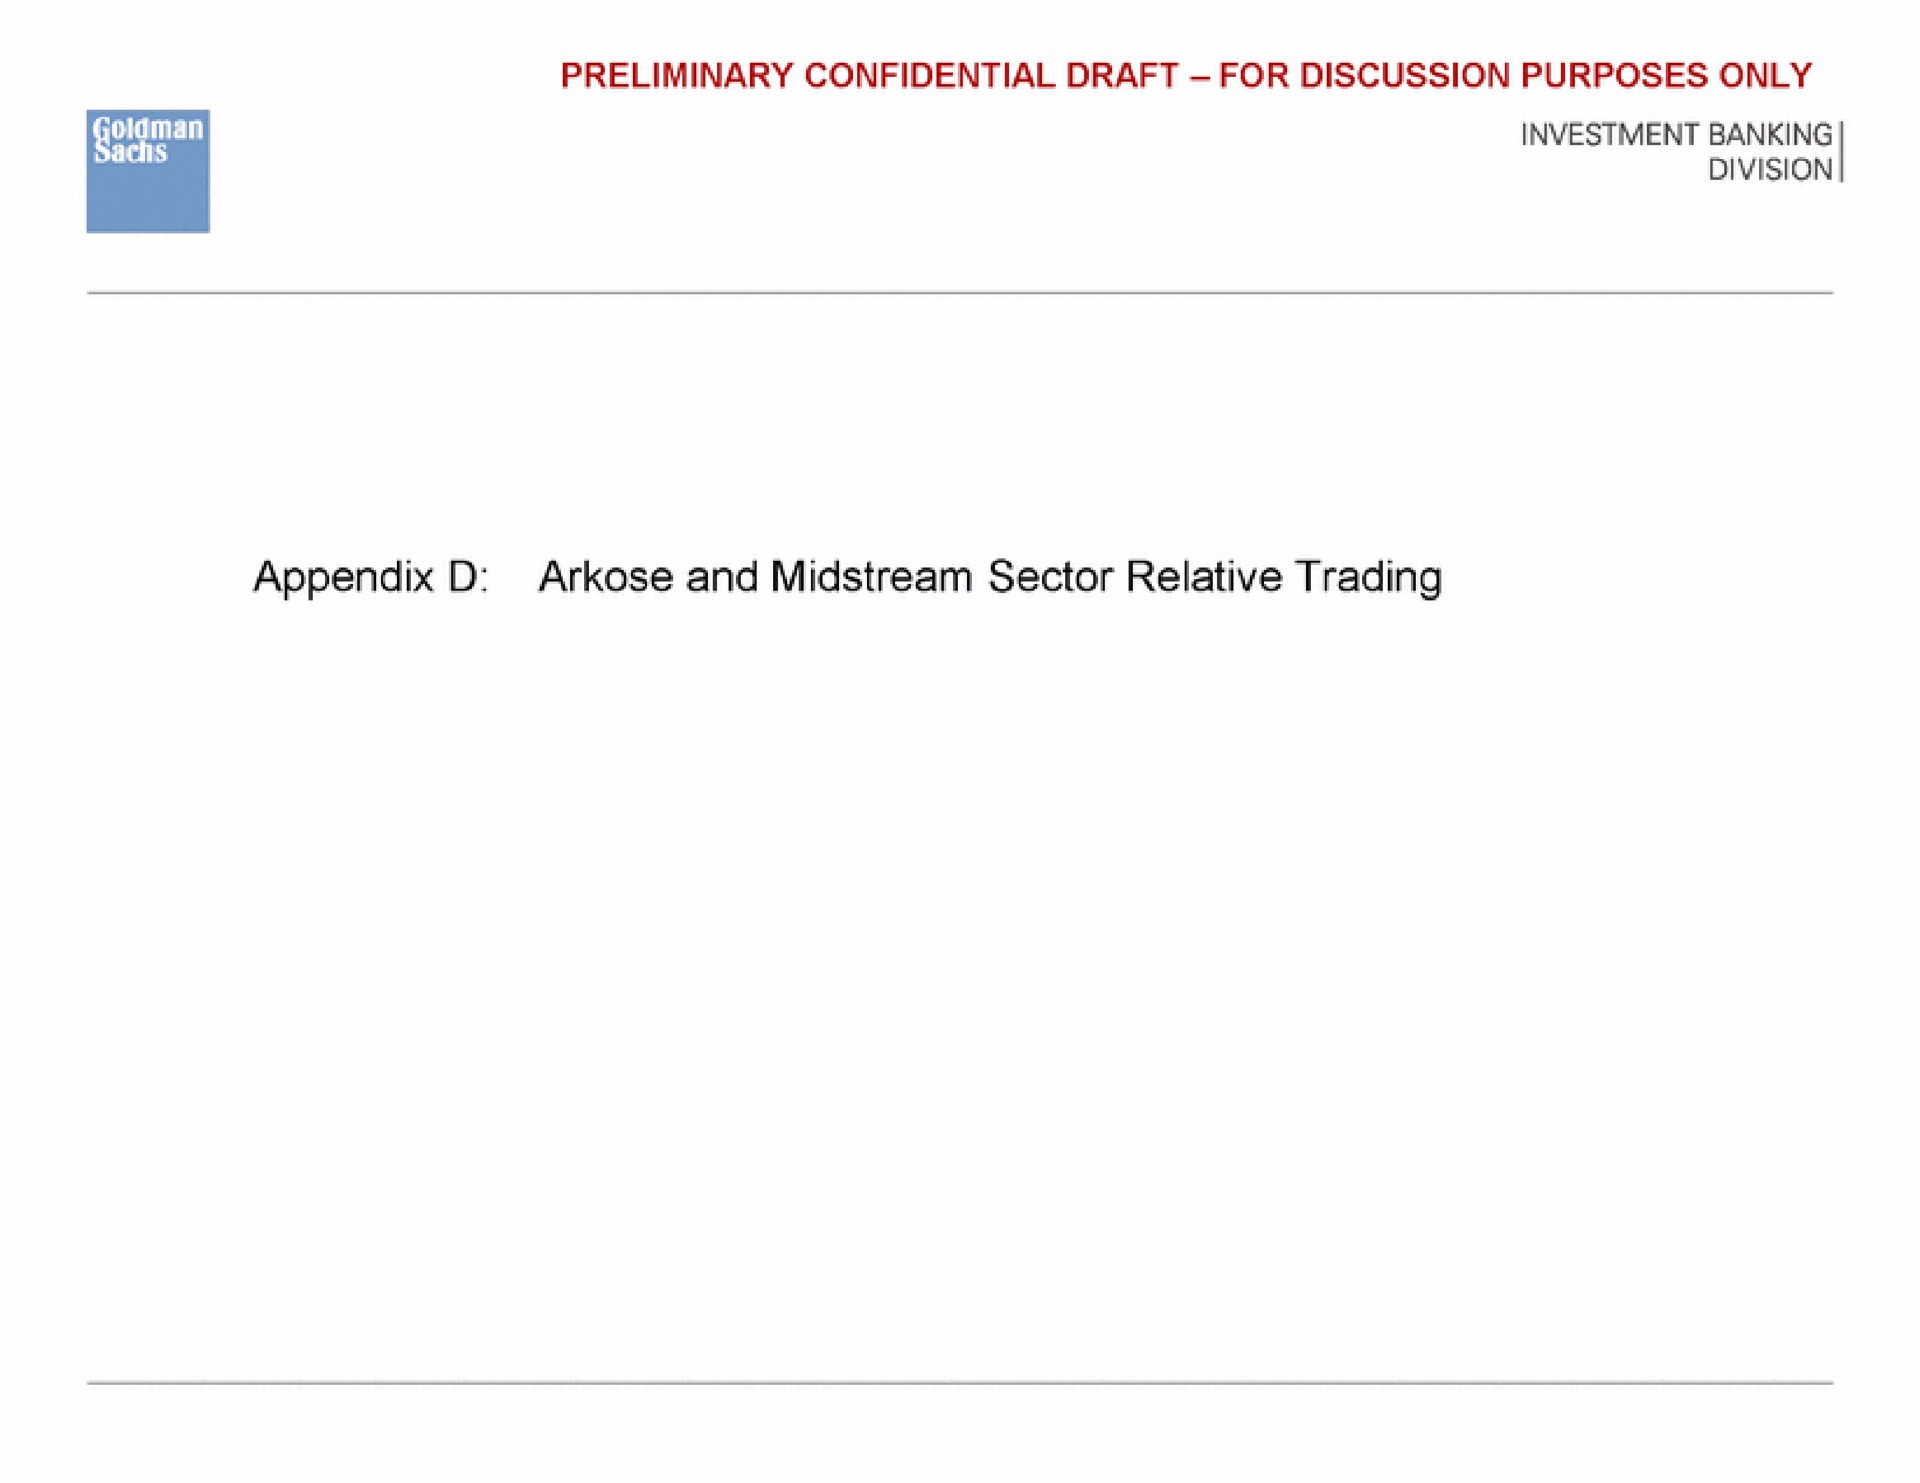 appendix arkose and midstream sector relative trading | Goldman Sachs